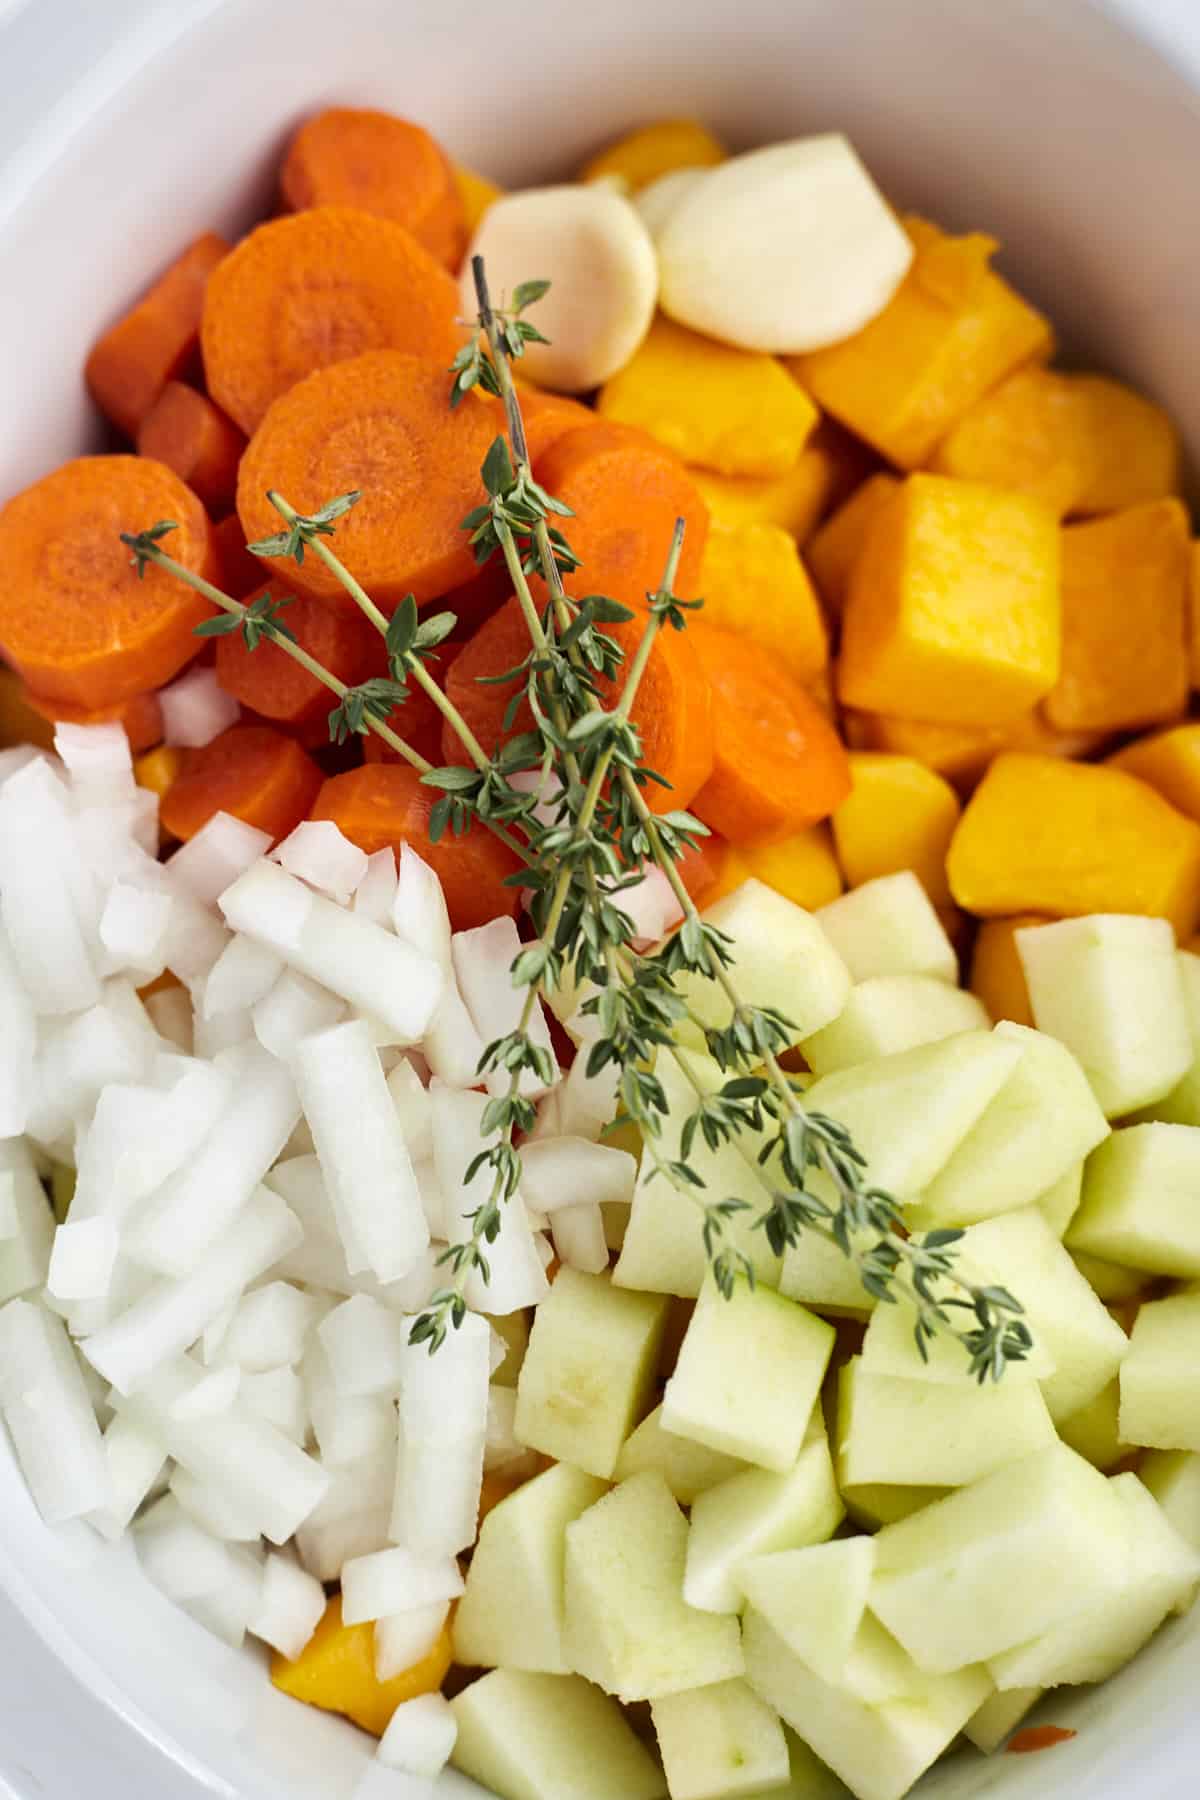 carrots, butternut squash, garlic cloves, diced onion, chopped green apples, and fresh herbs in a slow cooker